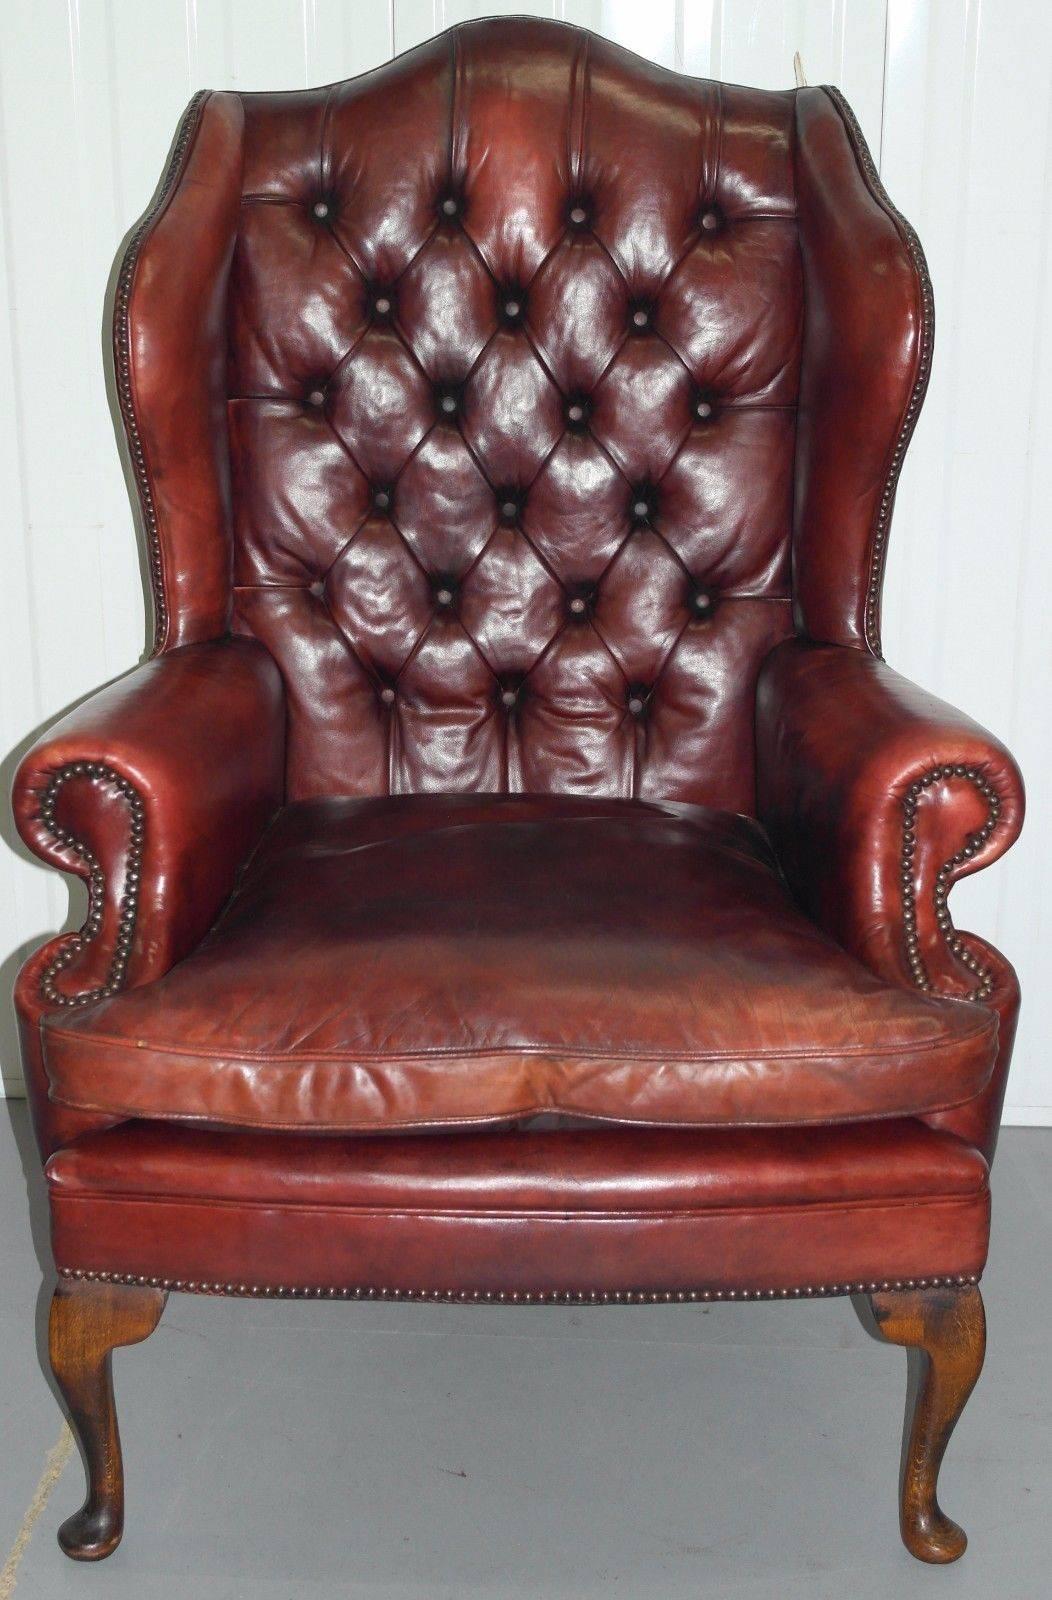 Wimbledon-Furniture

We are delighted to offer for sale this stunning pair of Chesterfield hand dyed aged oxblood leather with wide and straight back William Morris Style Wingback Queen Anne armchairs with matching Georgian straight leg style